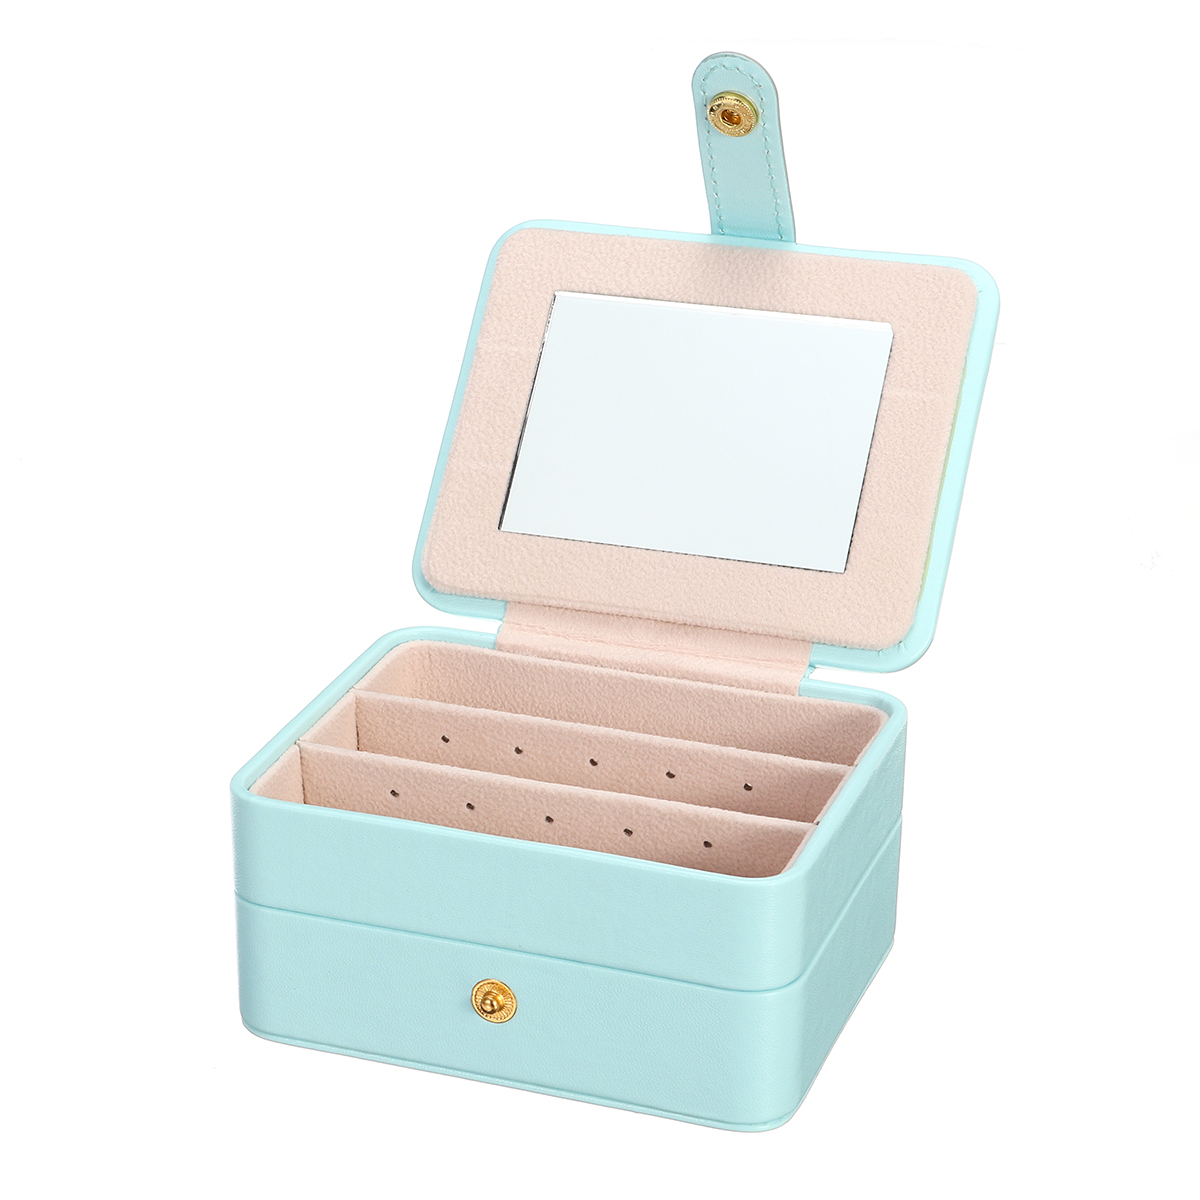 

11x9x5.5cm 3 Layers Ornaments Jewelry Storage Case Collecting Box with Built-in Mirror Make Up Case